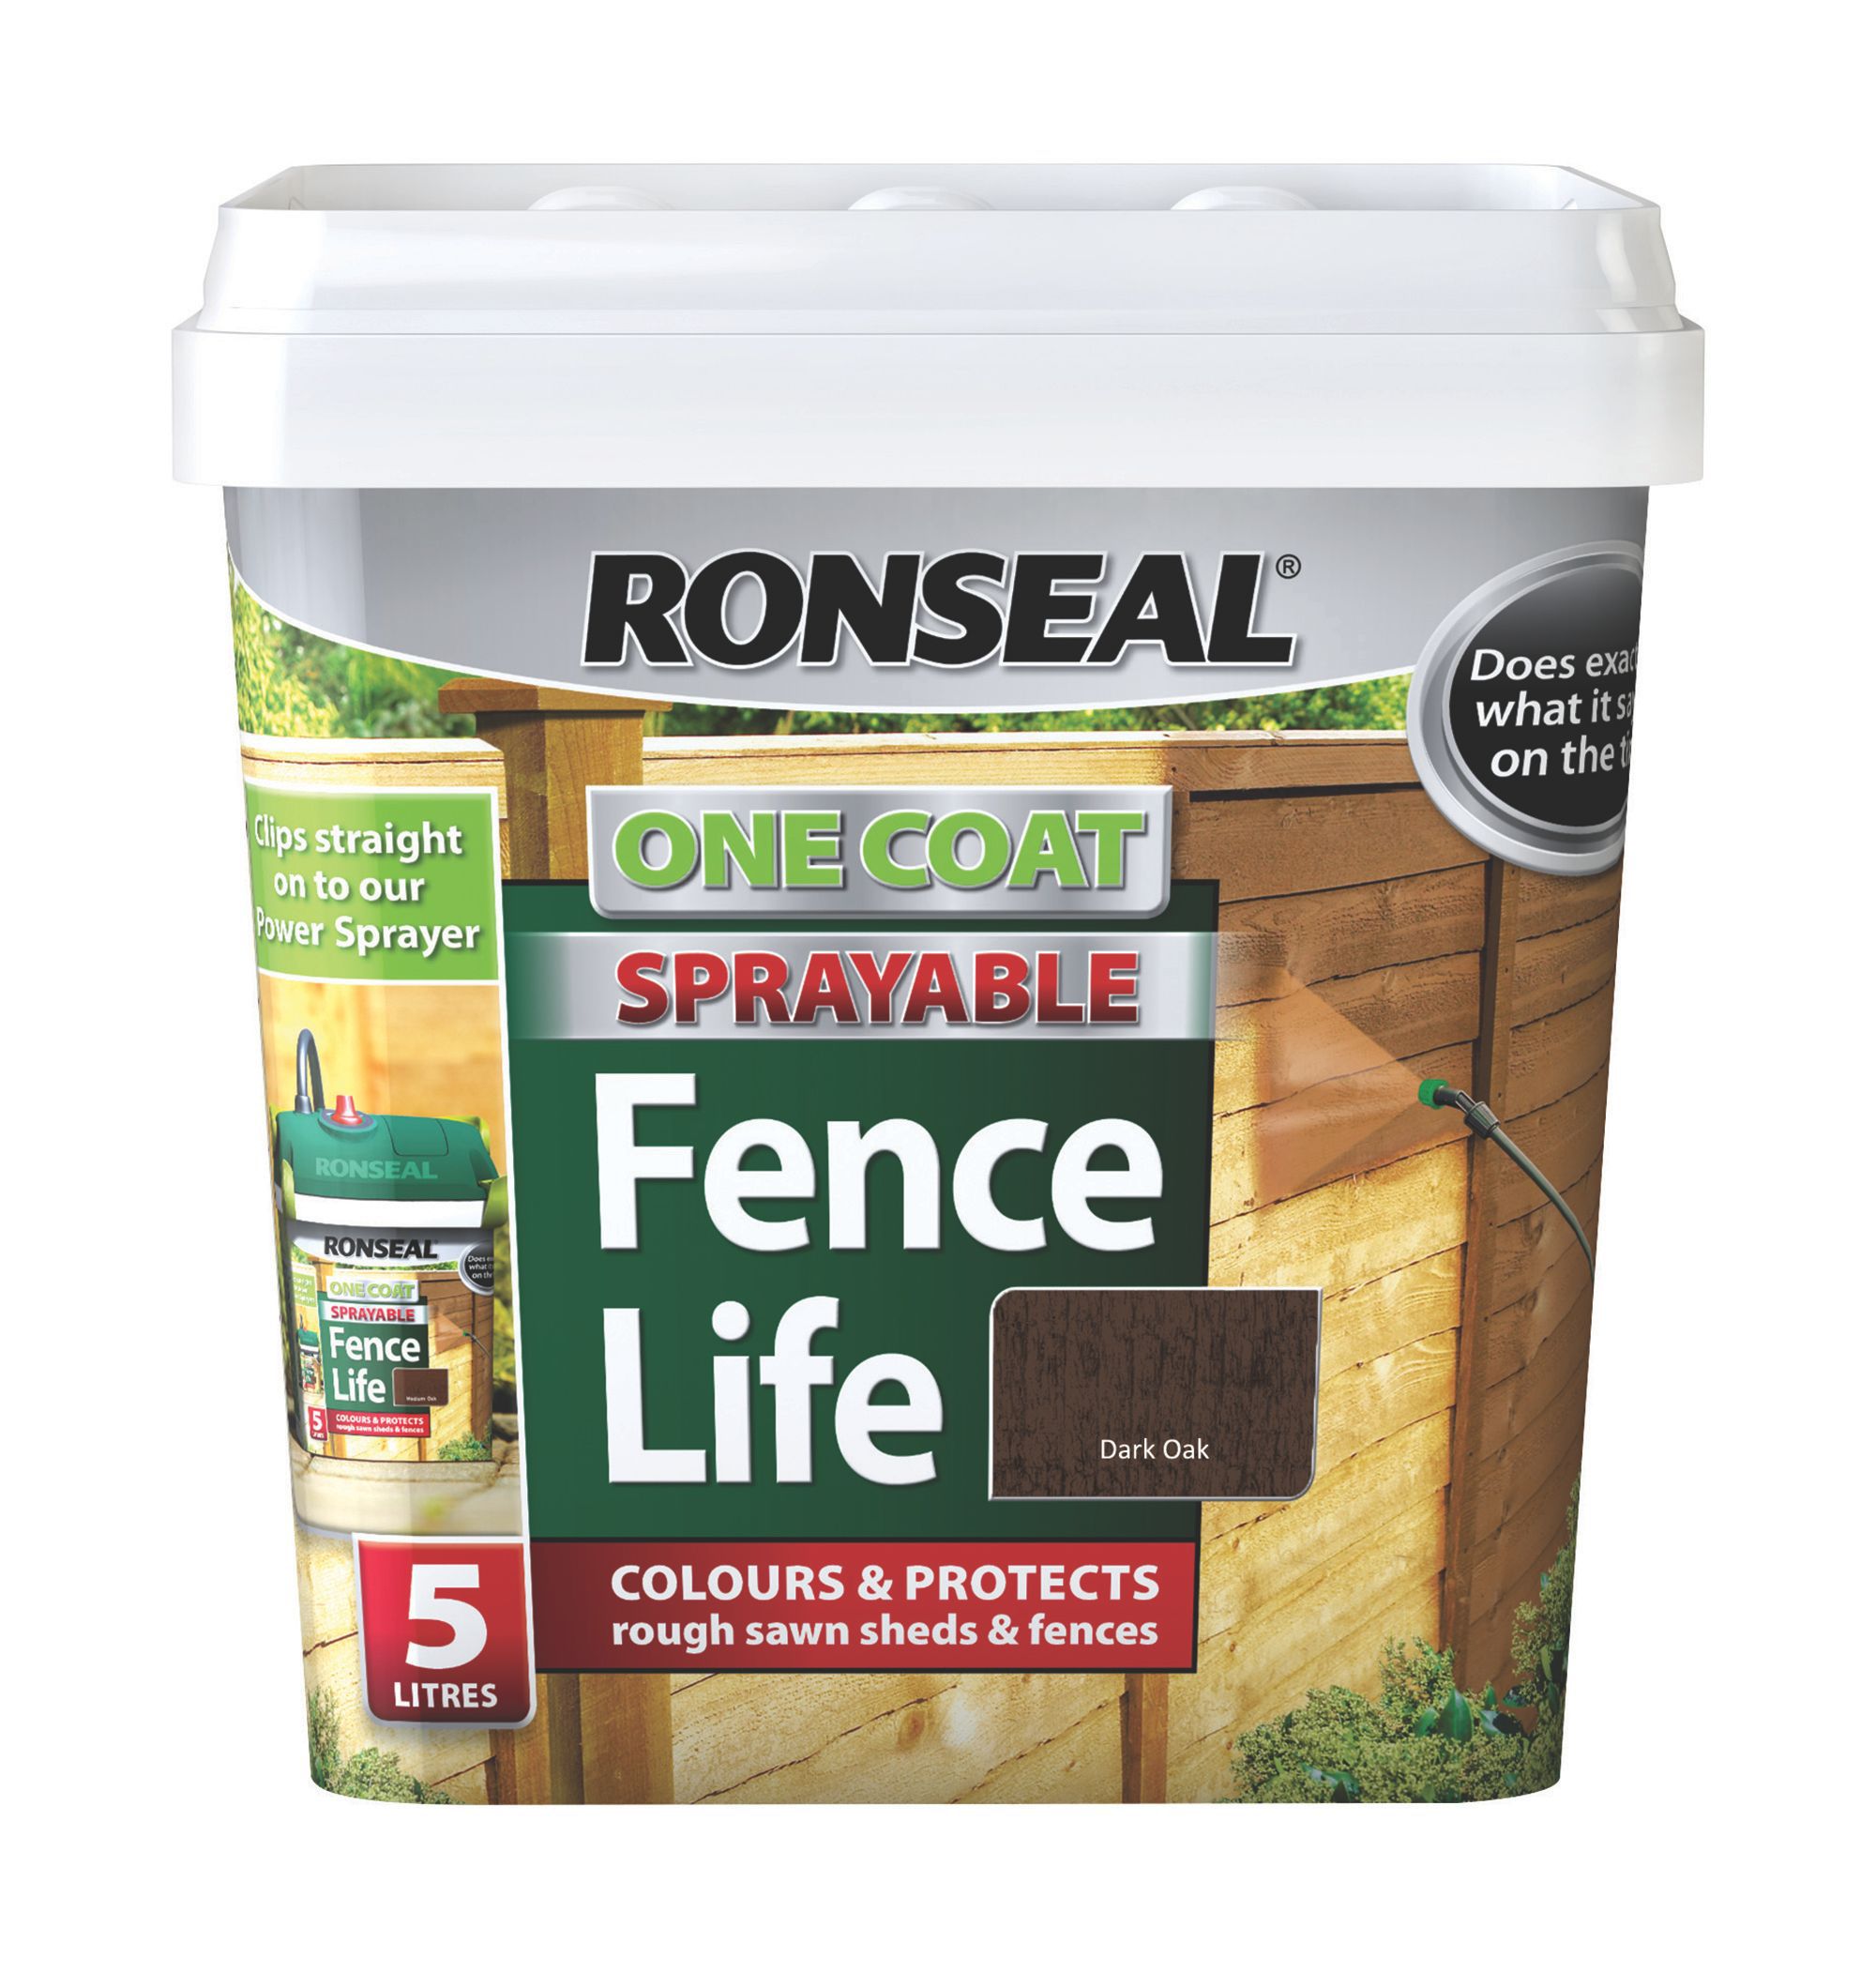 Ronseal One Coat Fence Life Red Cedar 9ltr Garden Fence Paint Fence Paint Ronseal Fence Paint